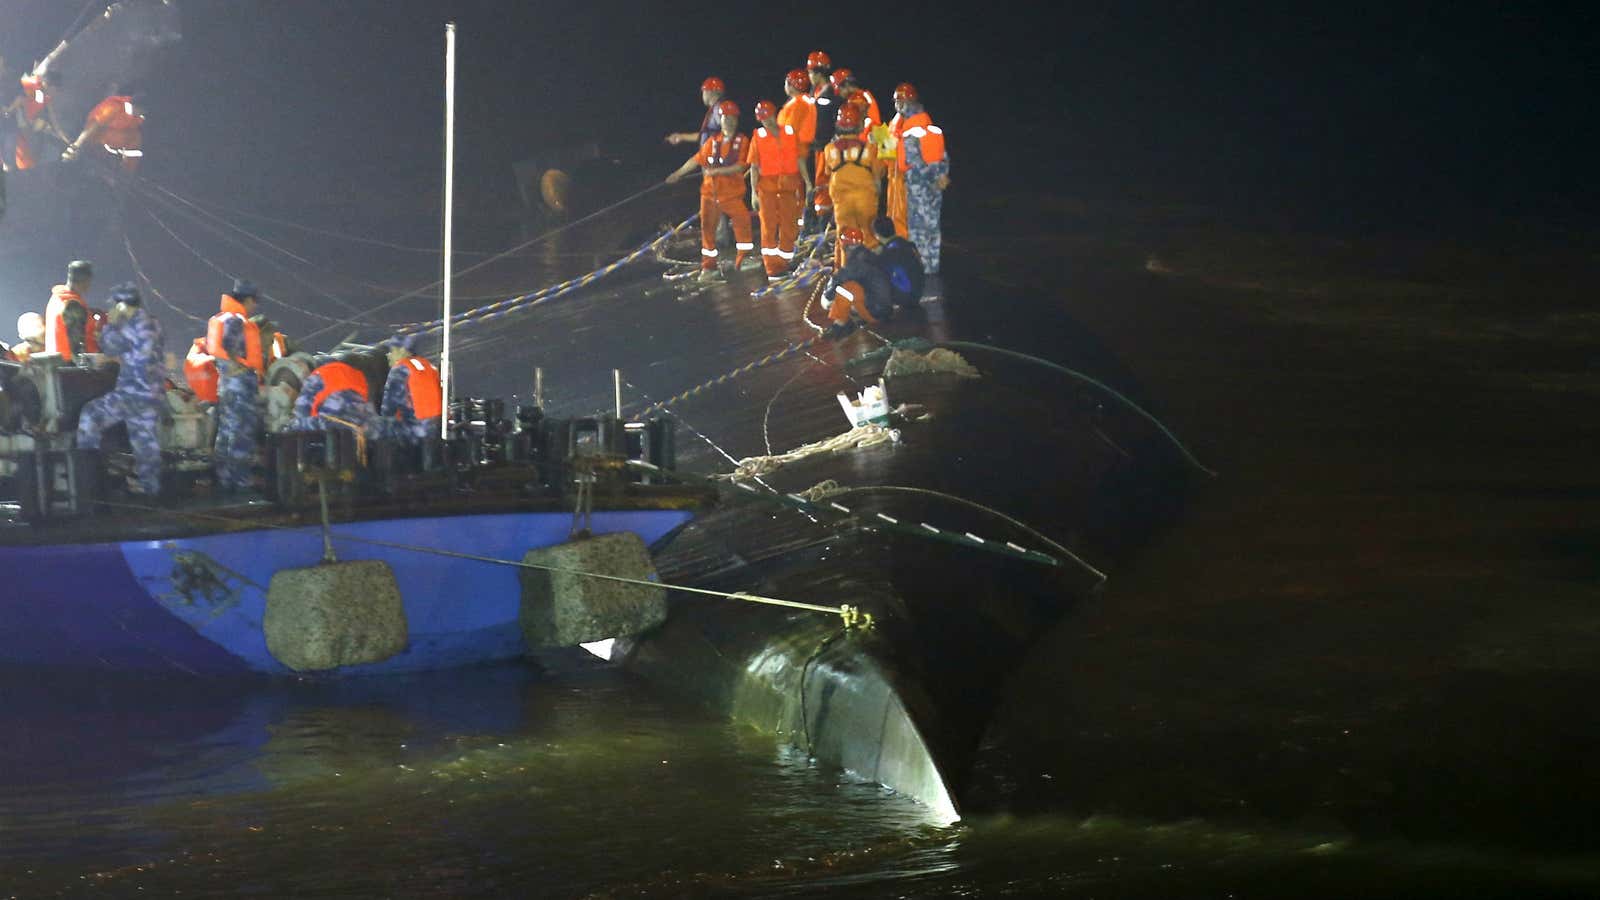 Rescue workers atop the sunken ship in the Yangtze River.